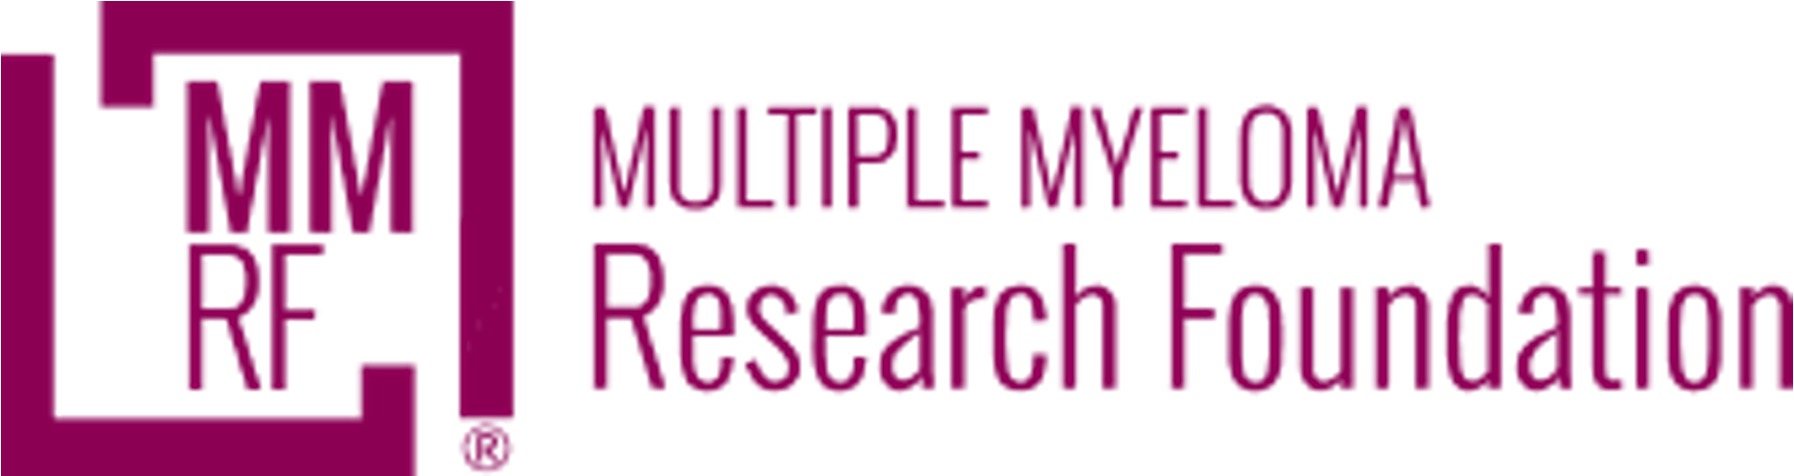 THE MULTIPLE MYELOMA RESEARCH FOUNDATION INC